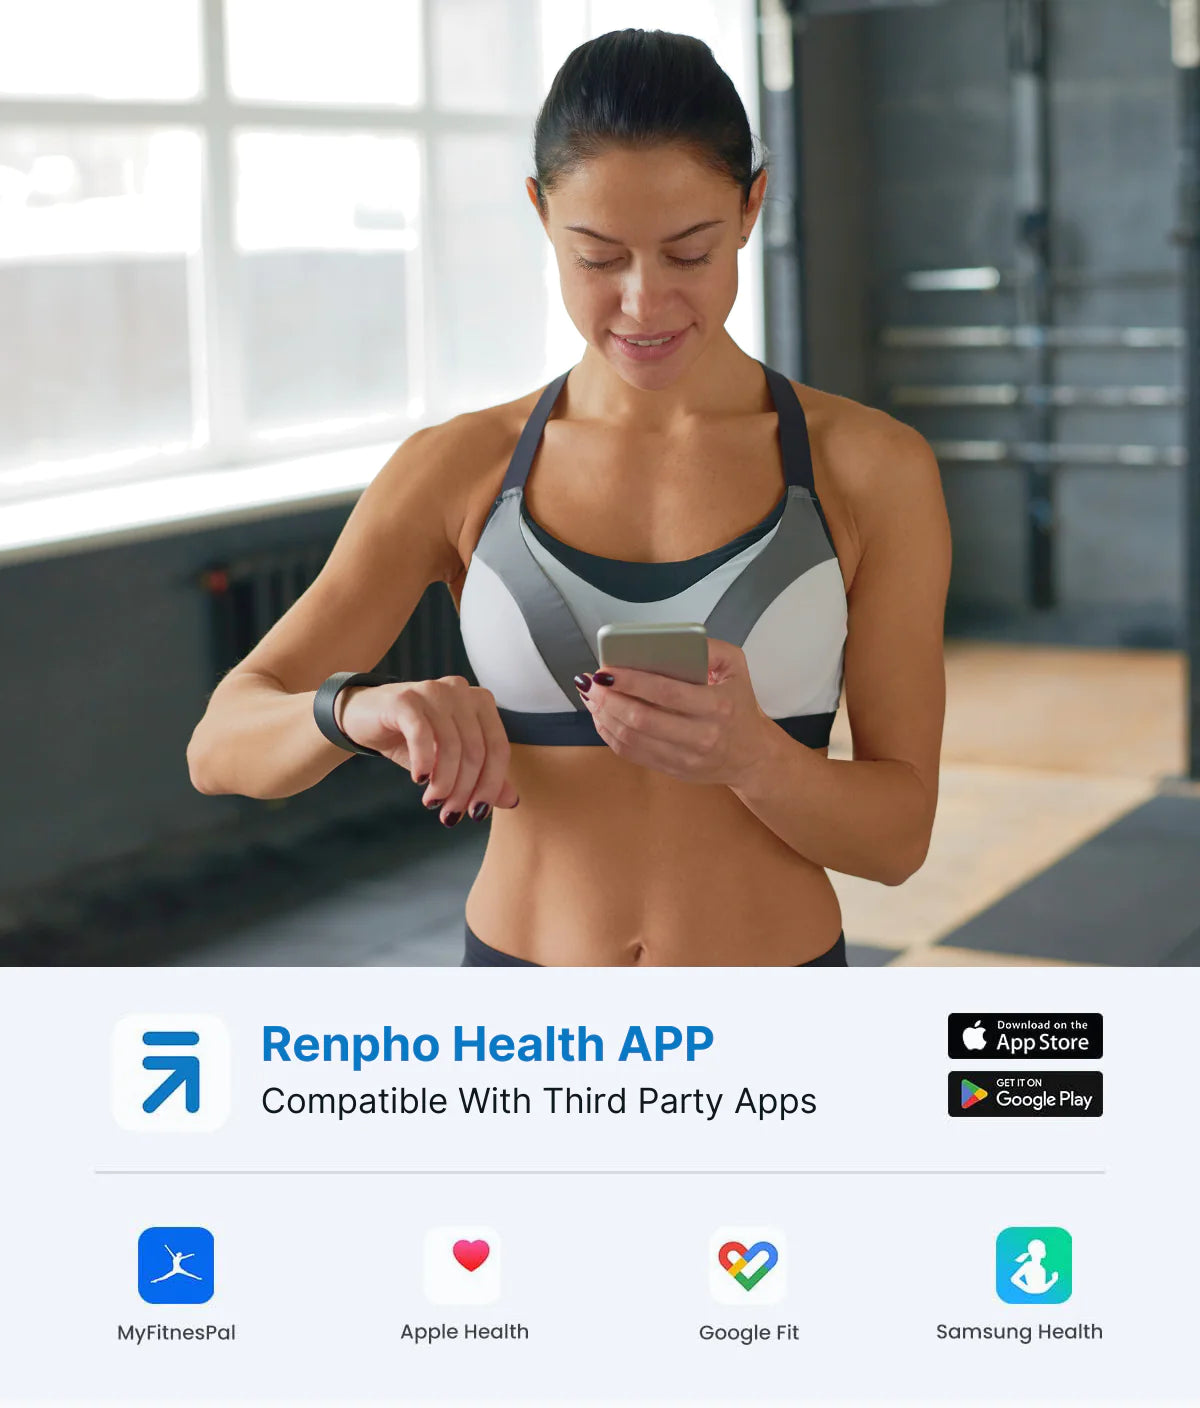 A woman in a gym, wearing a sports bra and leggings, checks her smartphone intently. She's standing near sunlit windows. Logos of Renpho EU health app, MyFitnessPal, and Elis Solar Smart Body Scale.